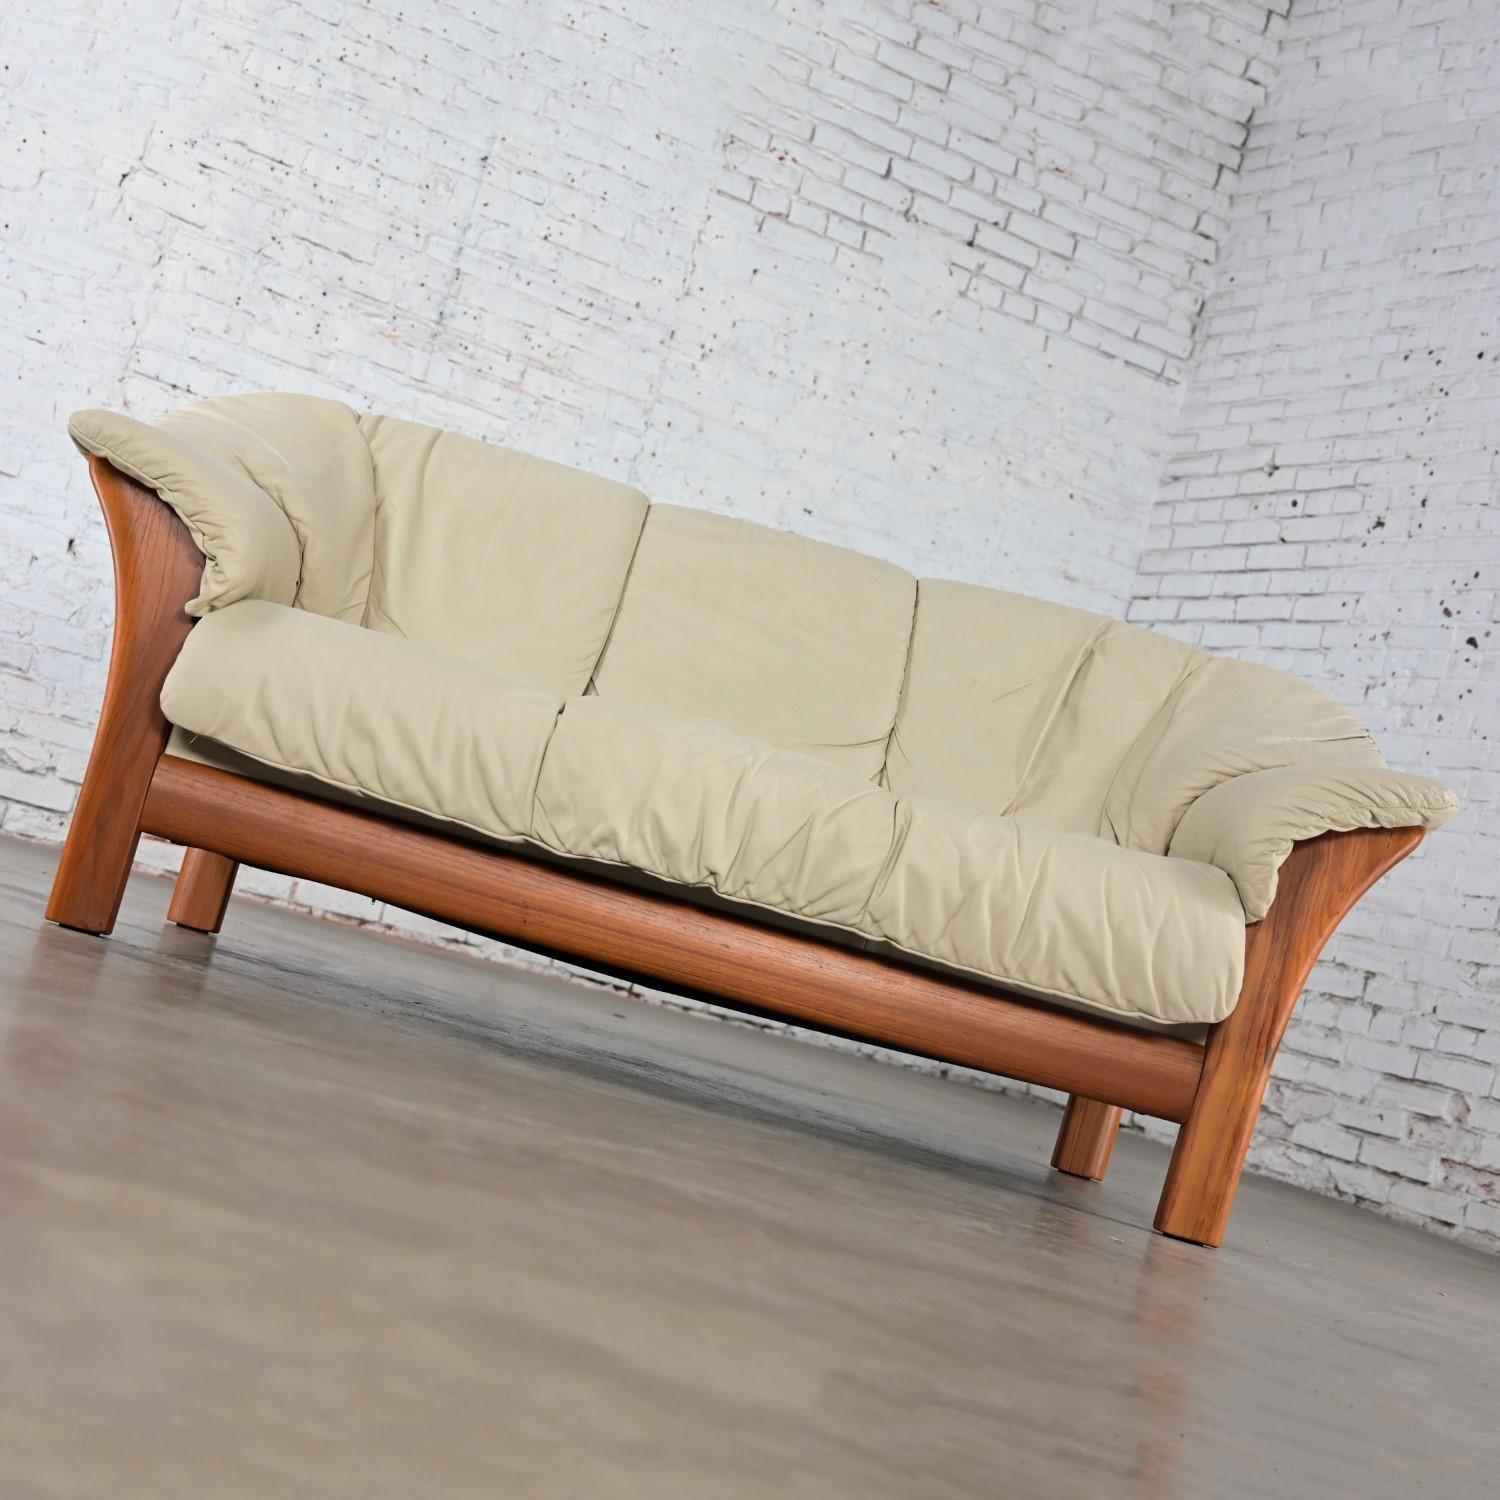 Scandinavian Modern Teak & Off White Leather Small Sofa Attributed to Ekornes For Sale 1